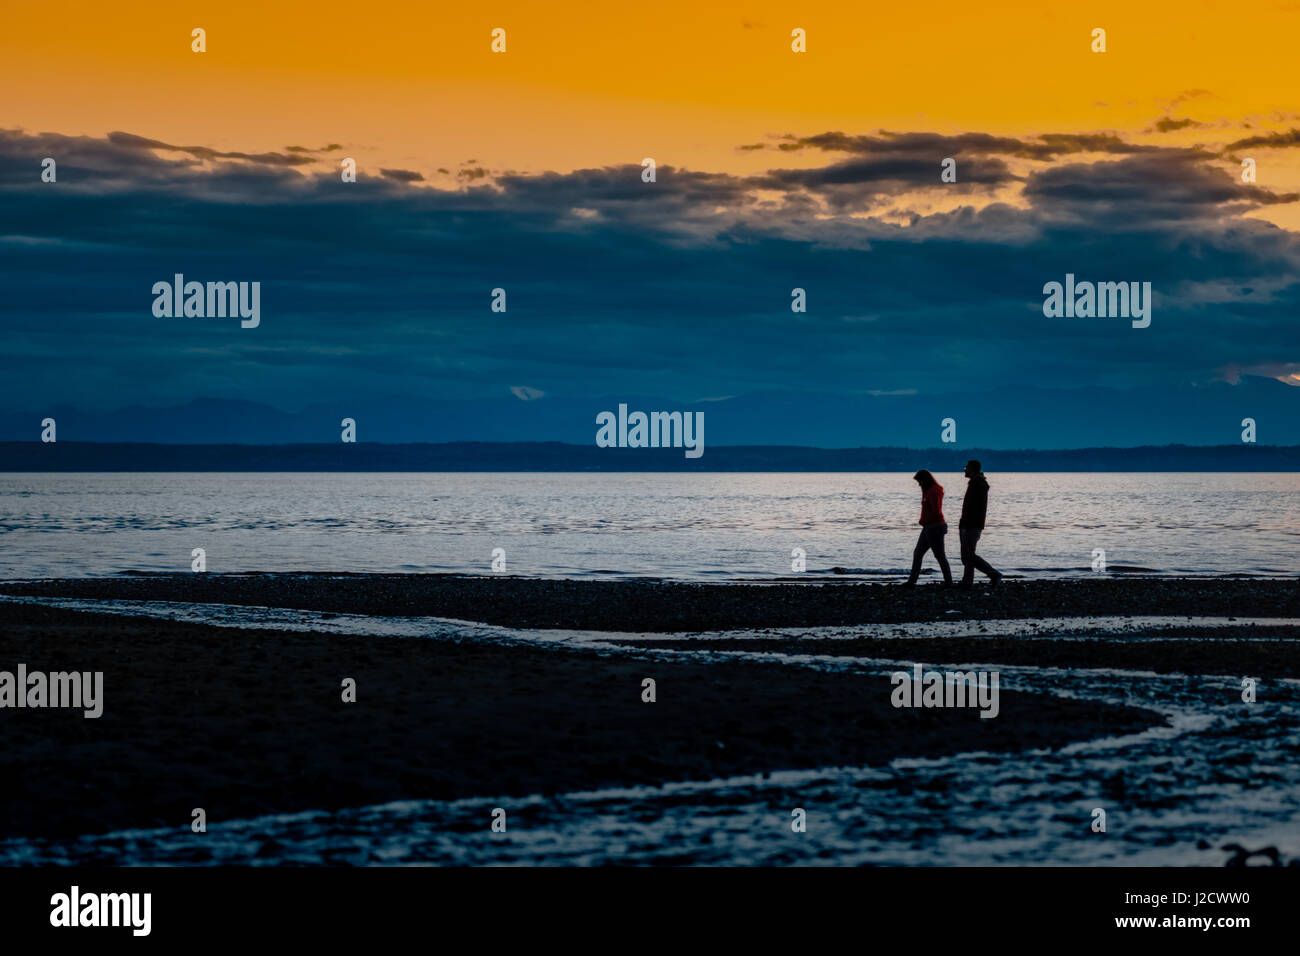 Couple strolling along the beach in a gloomy, cloudy sunset sky in Puget Sound Seattle. In walking, we find peace from the turmoils we are in in life. Stock Photo